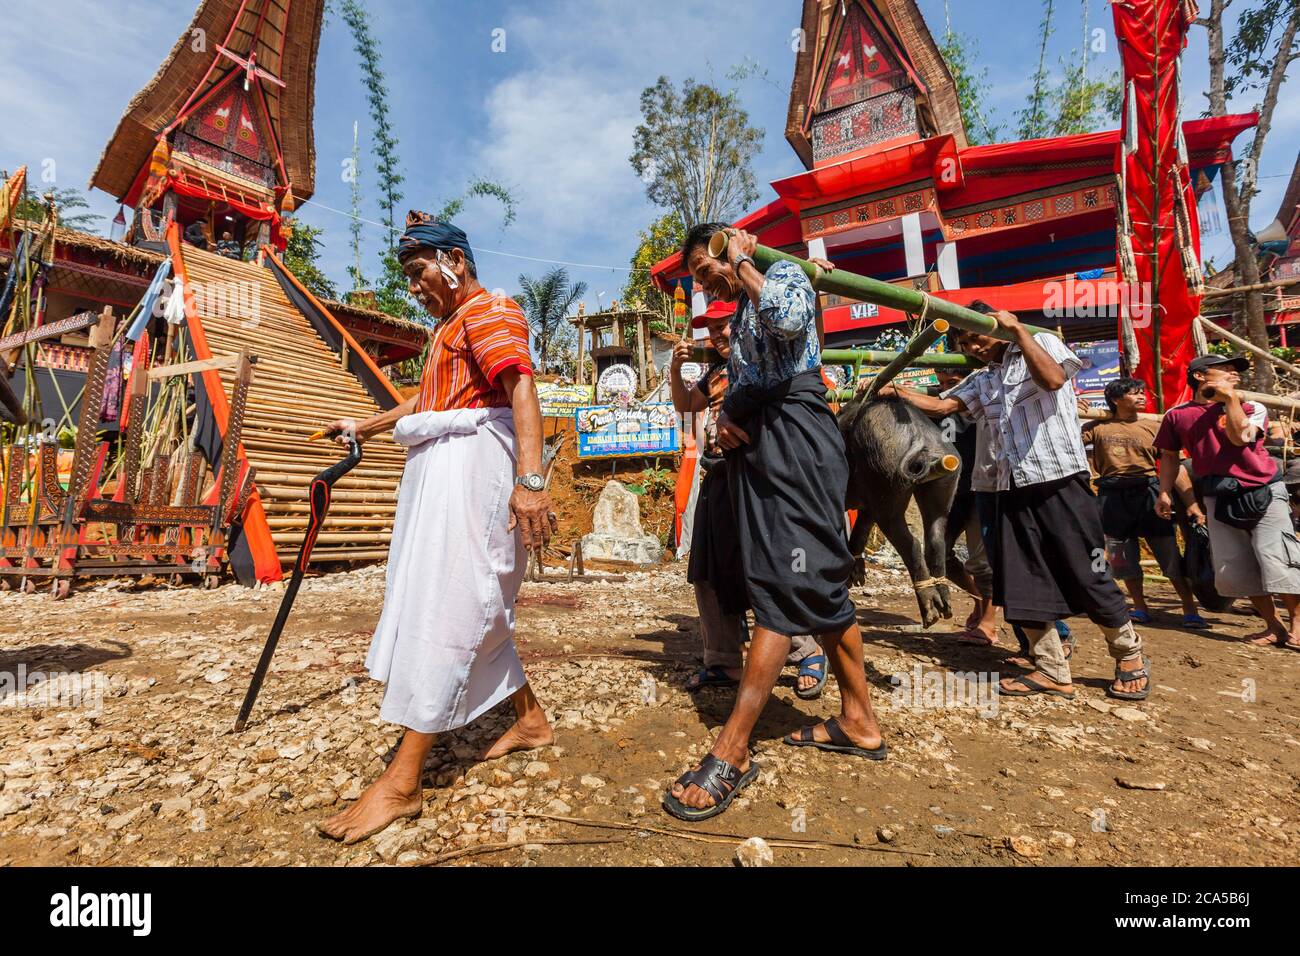 Indonesia, Sulawesi, Tana Toraja, Makale, funeral ceremony, procession and men carrying pigs to be sacrificed Stock Photo